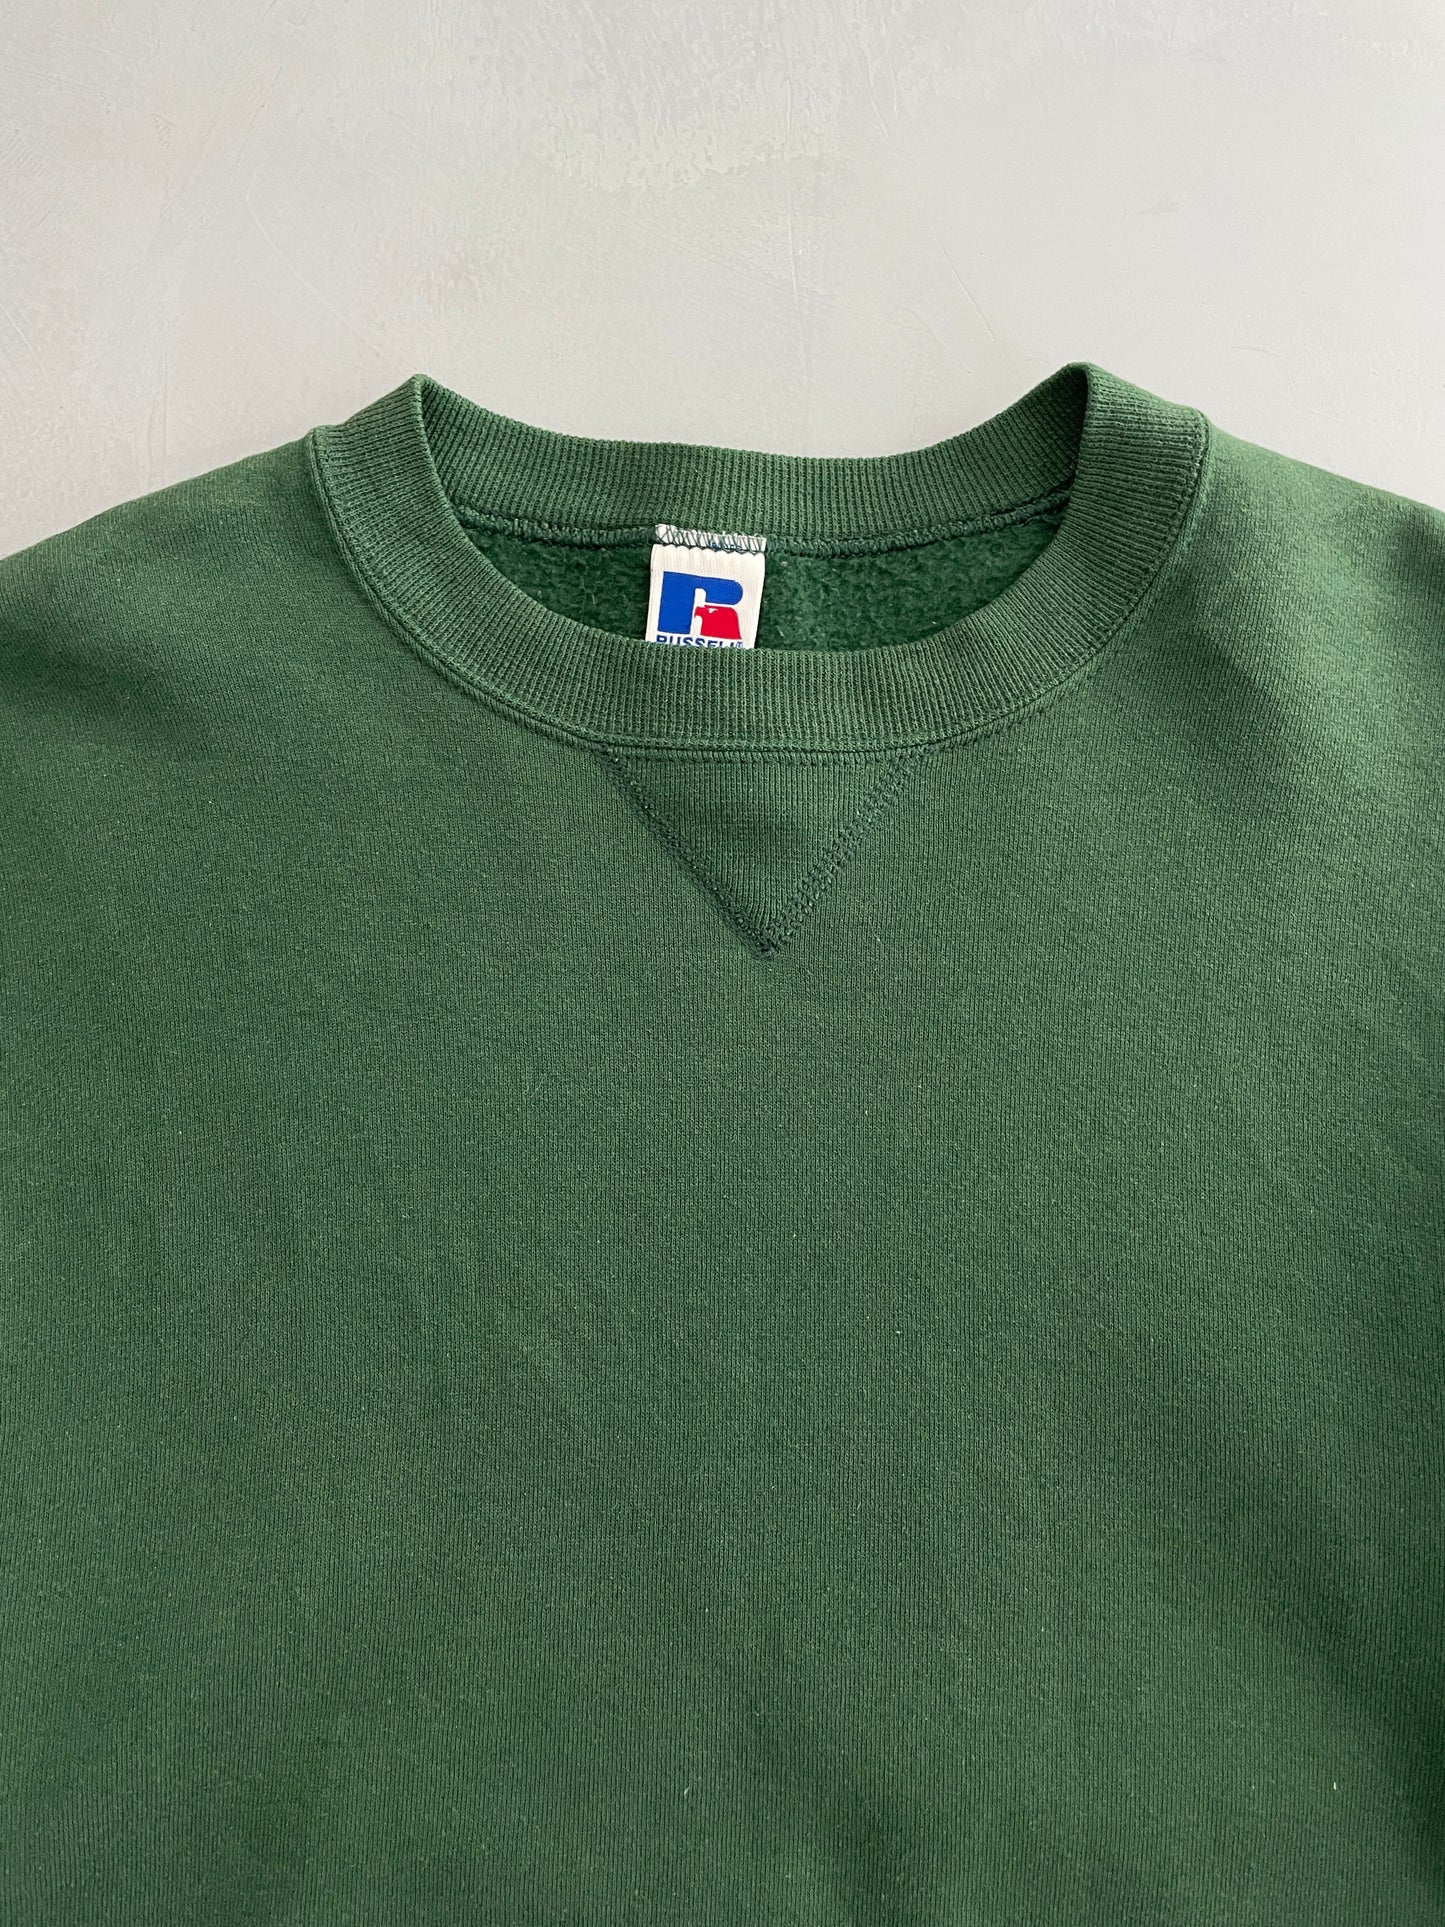 Faded Made in USA Blank Russell Sweatshirt [L]